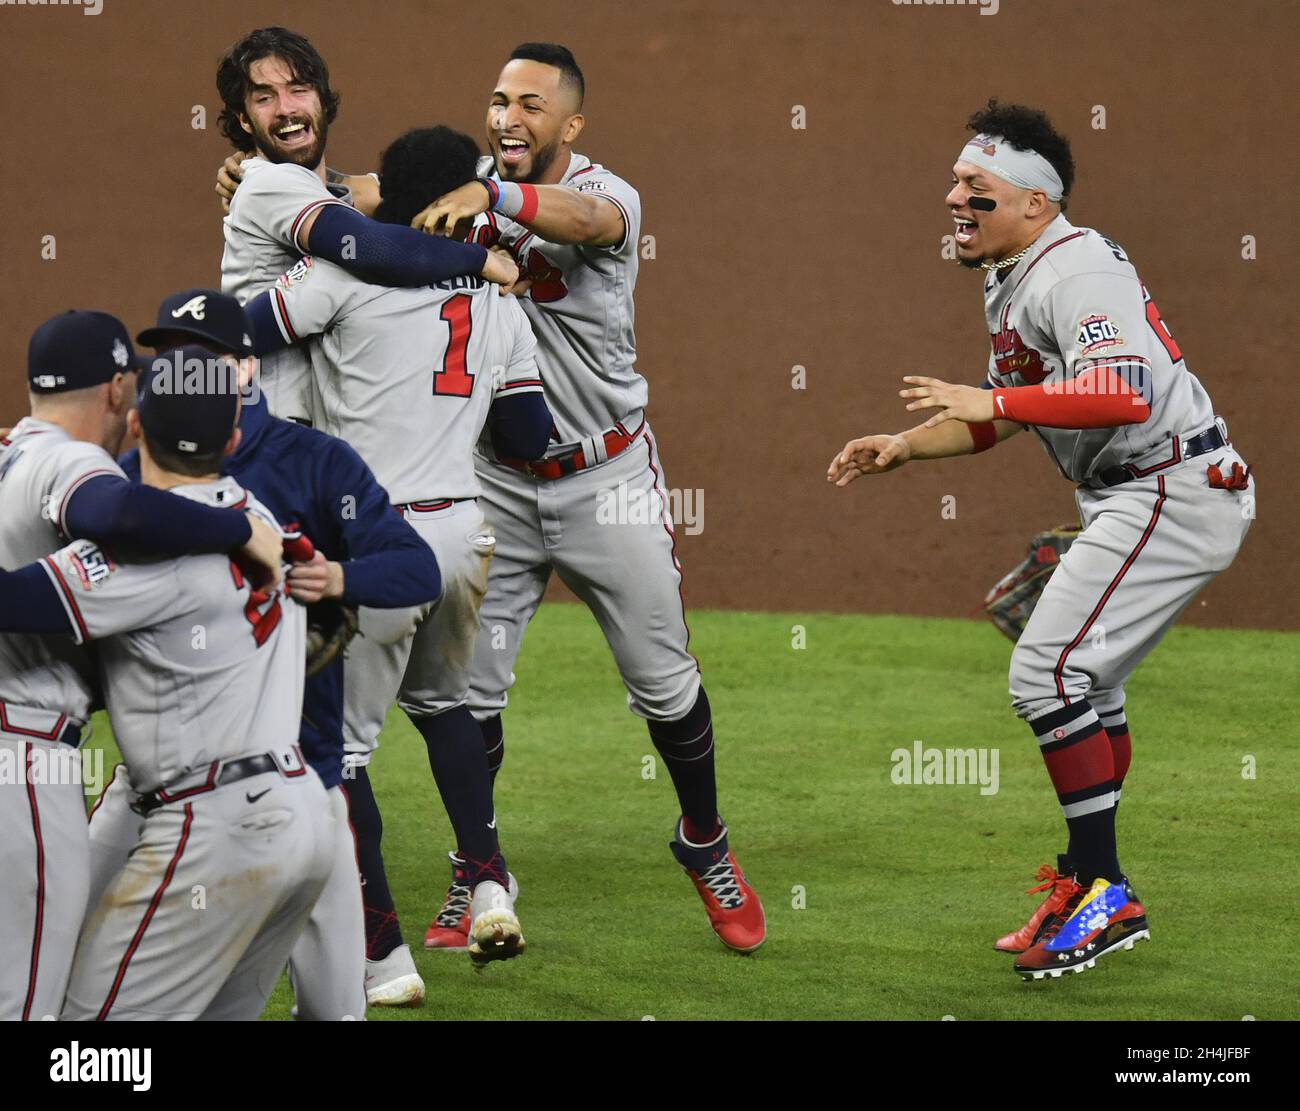 Houston, United States. 02nd Nov, 2021. The Atlanta Braves celebrate win over the Houston Astros in game six in the MLB World Series at Minute Maid Park on Tuesday, November 2, 2021 in Houston, Texas. Atlanta wins the World Series four game to two with a 7-0 shut out win over Houston. Photo by Maria Lysaker/UPI Credit: UPI/Alamy Live News Stock Photo